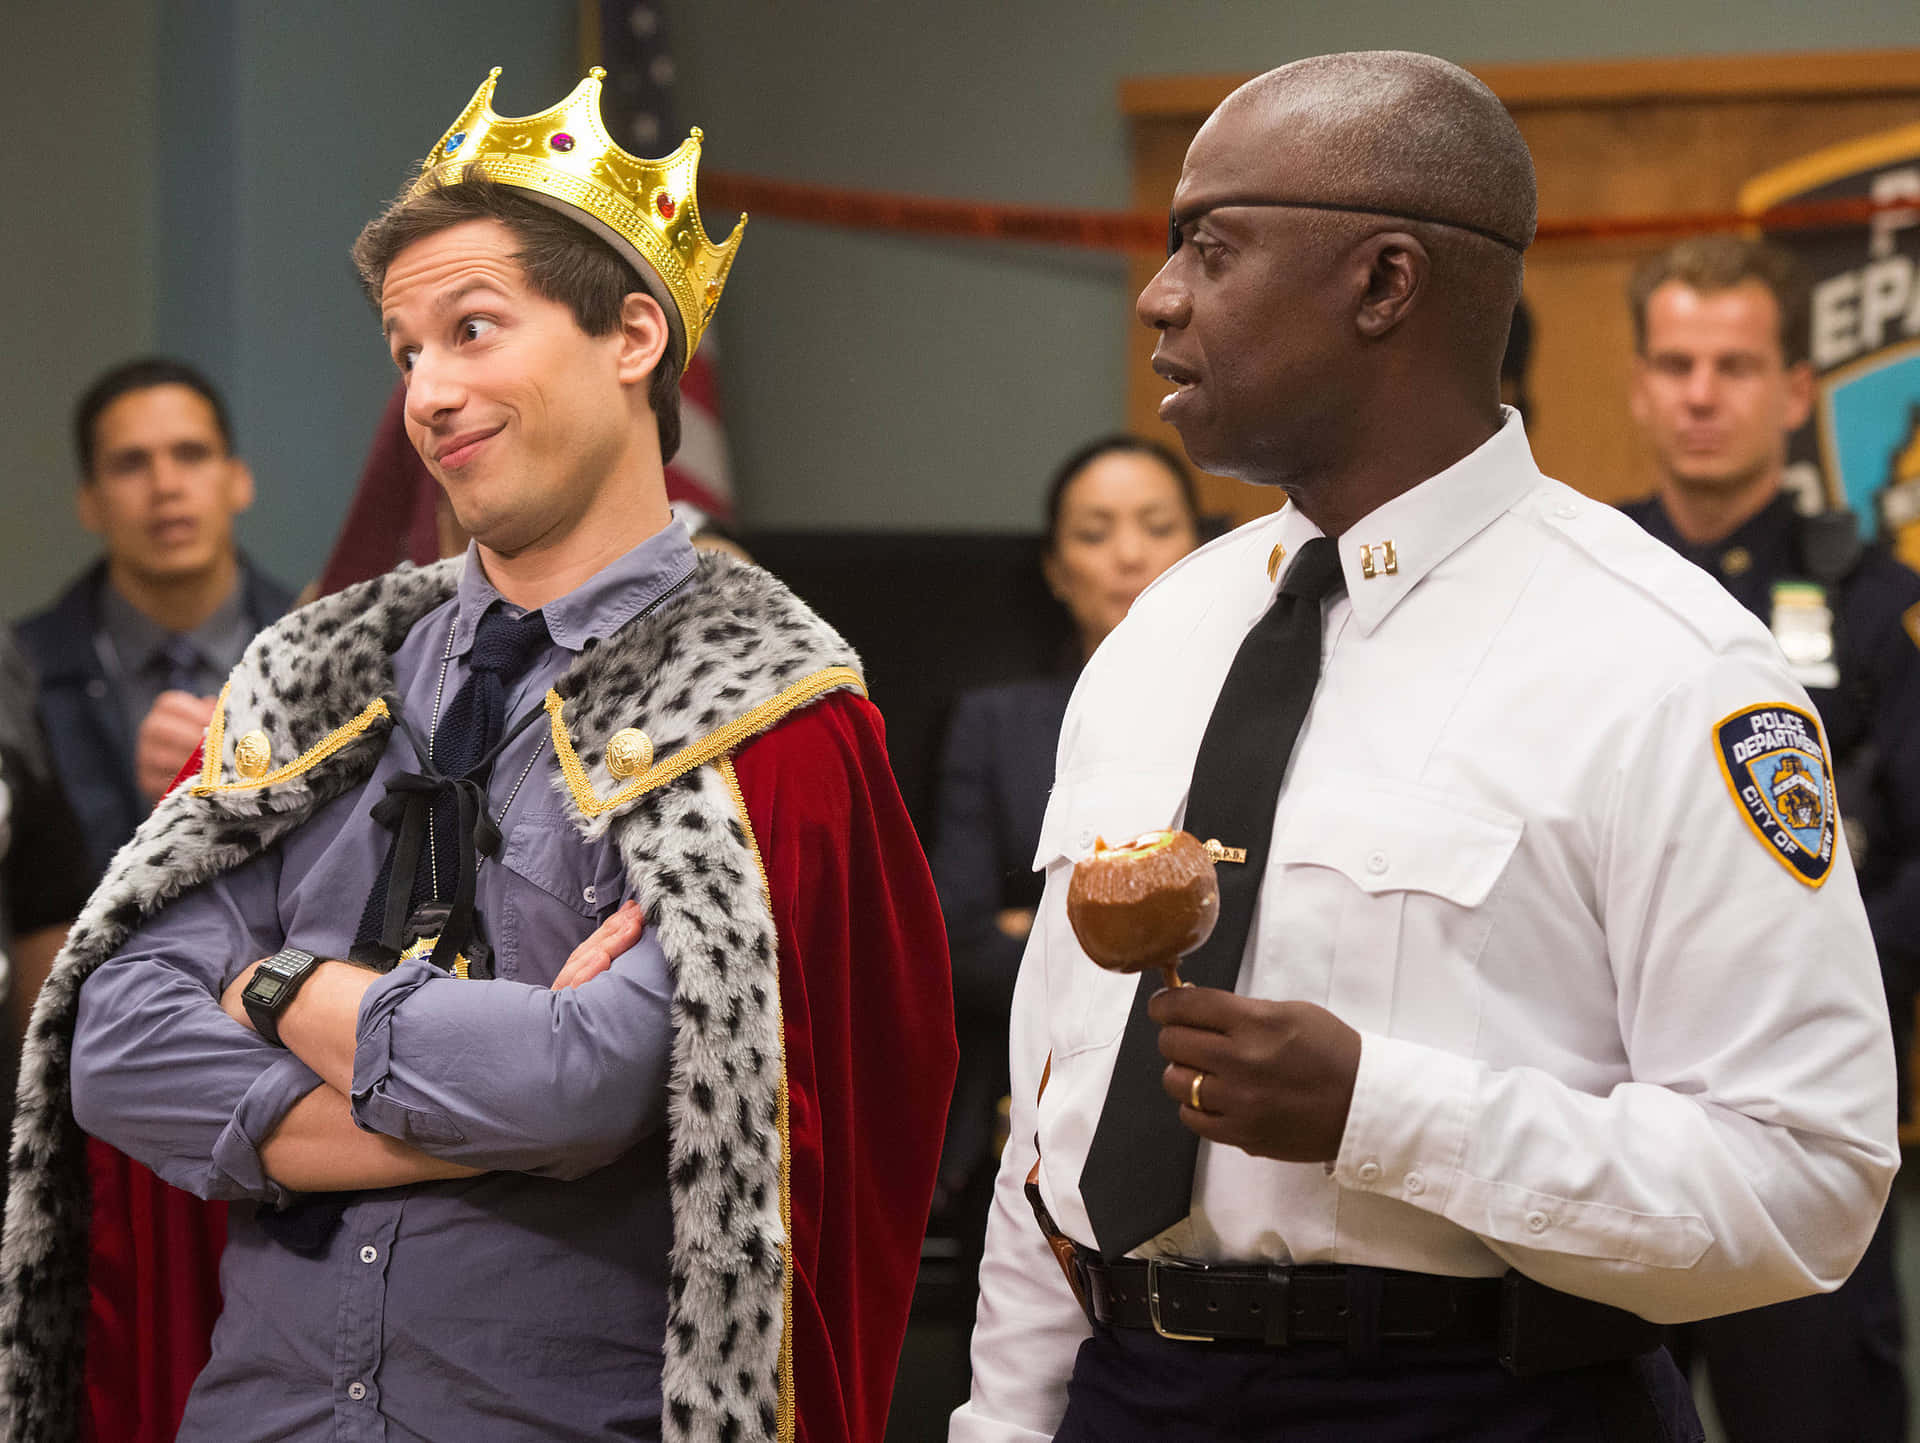 Get Ready For Laughs with Brooklyn Nine Nine!